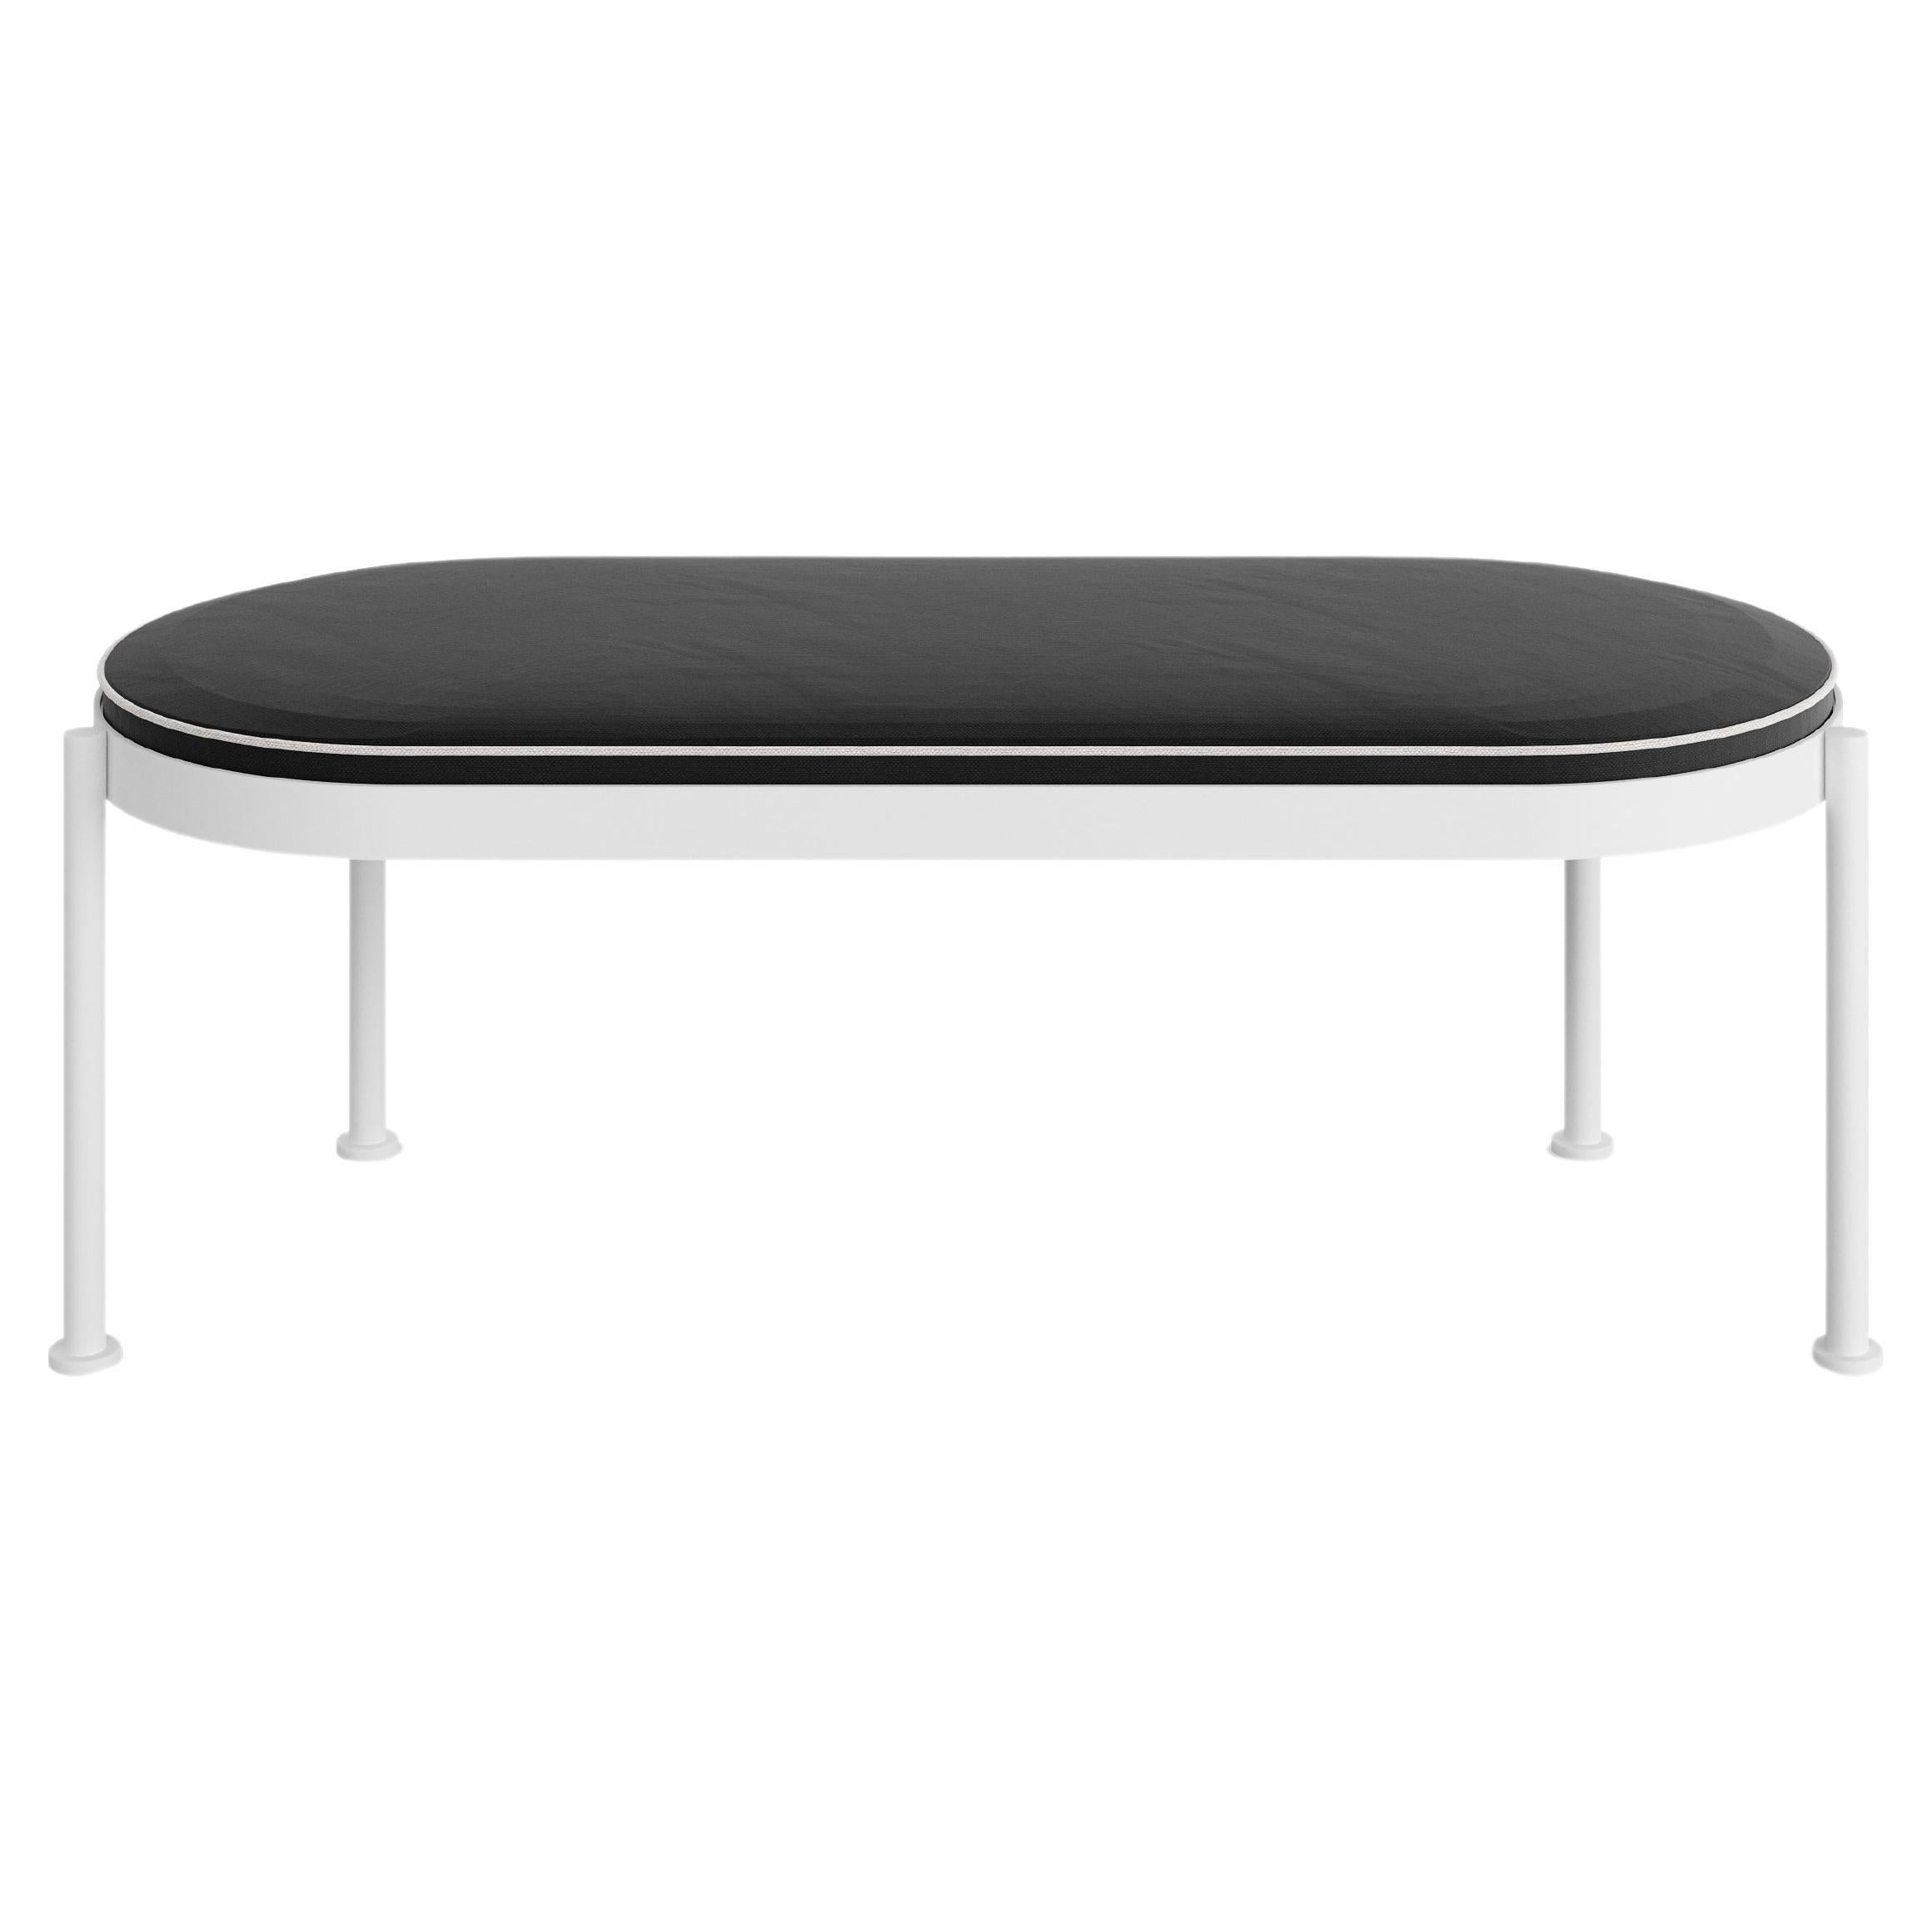 Bench with Back in Black Stainless Steel and Black Water-Resistant Fabric For Sale